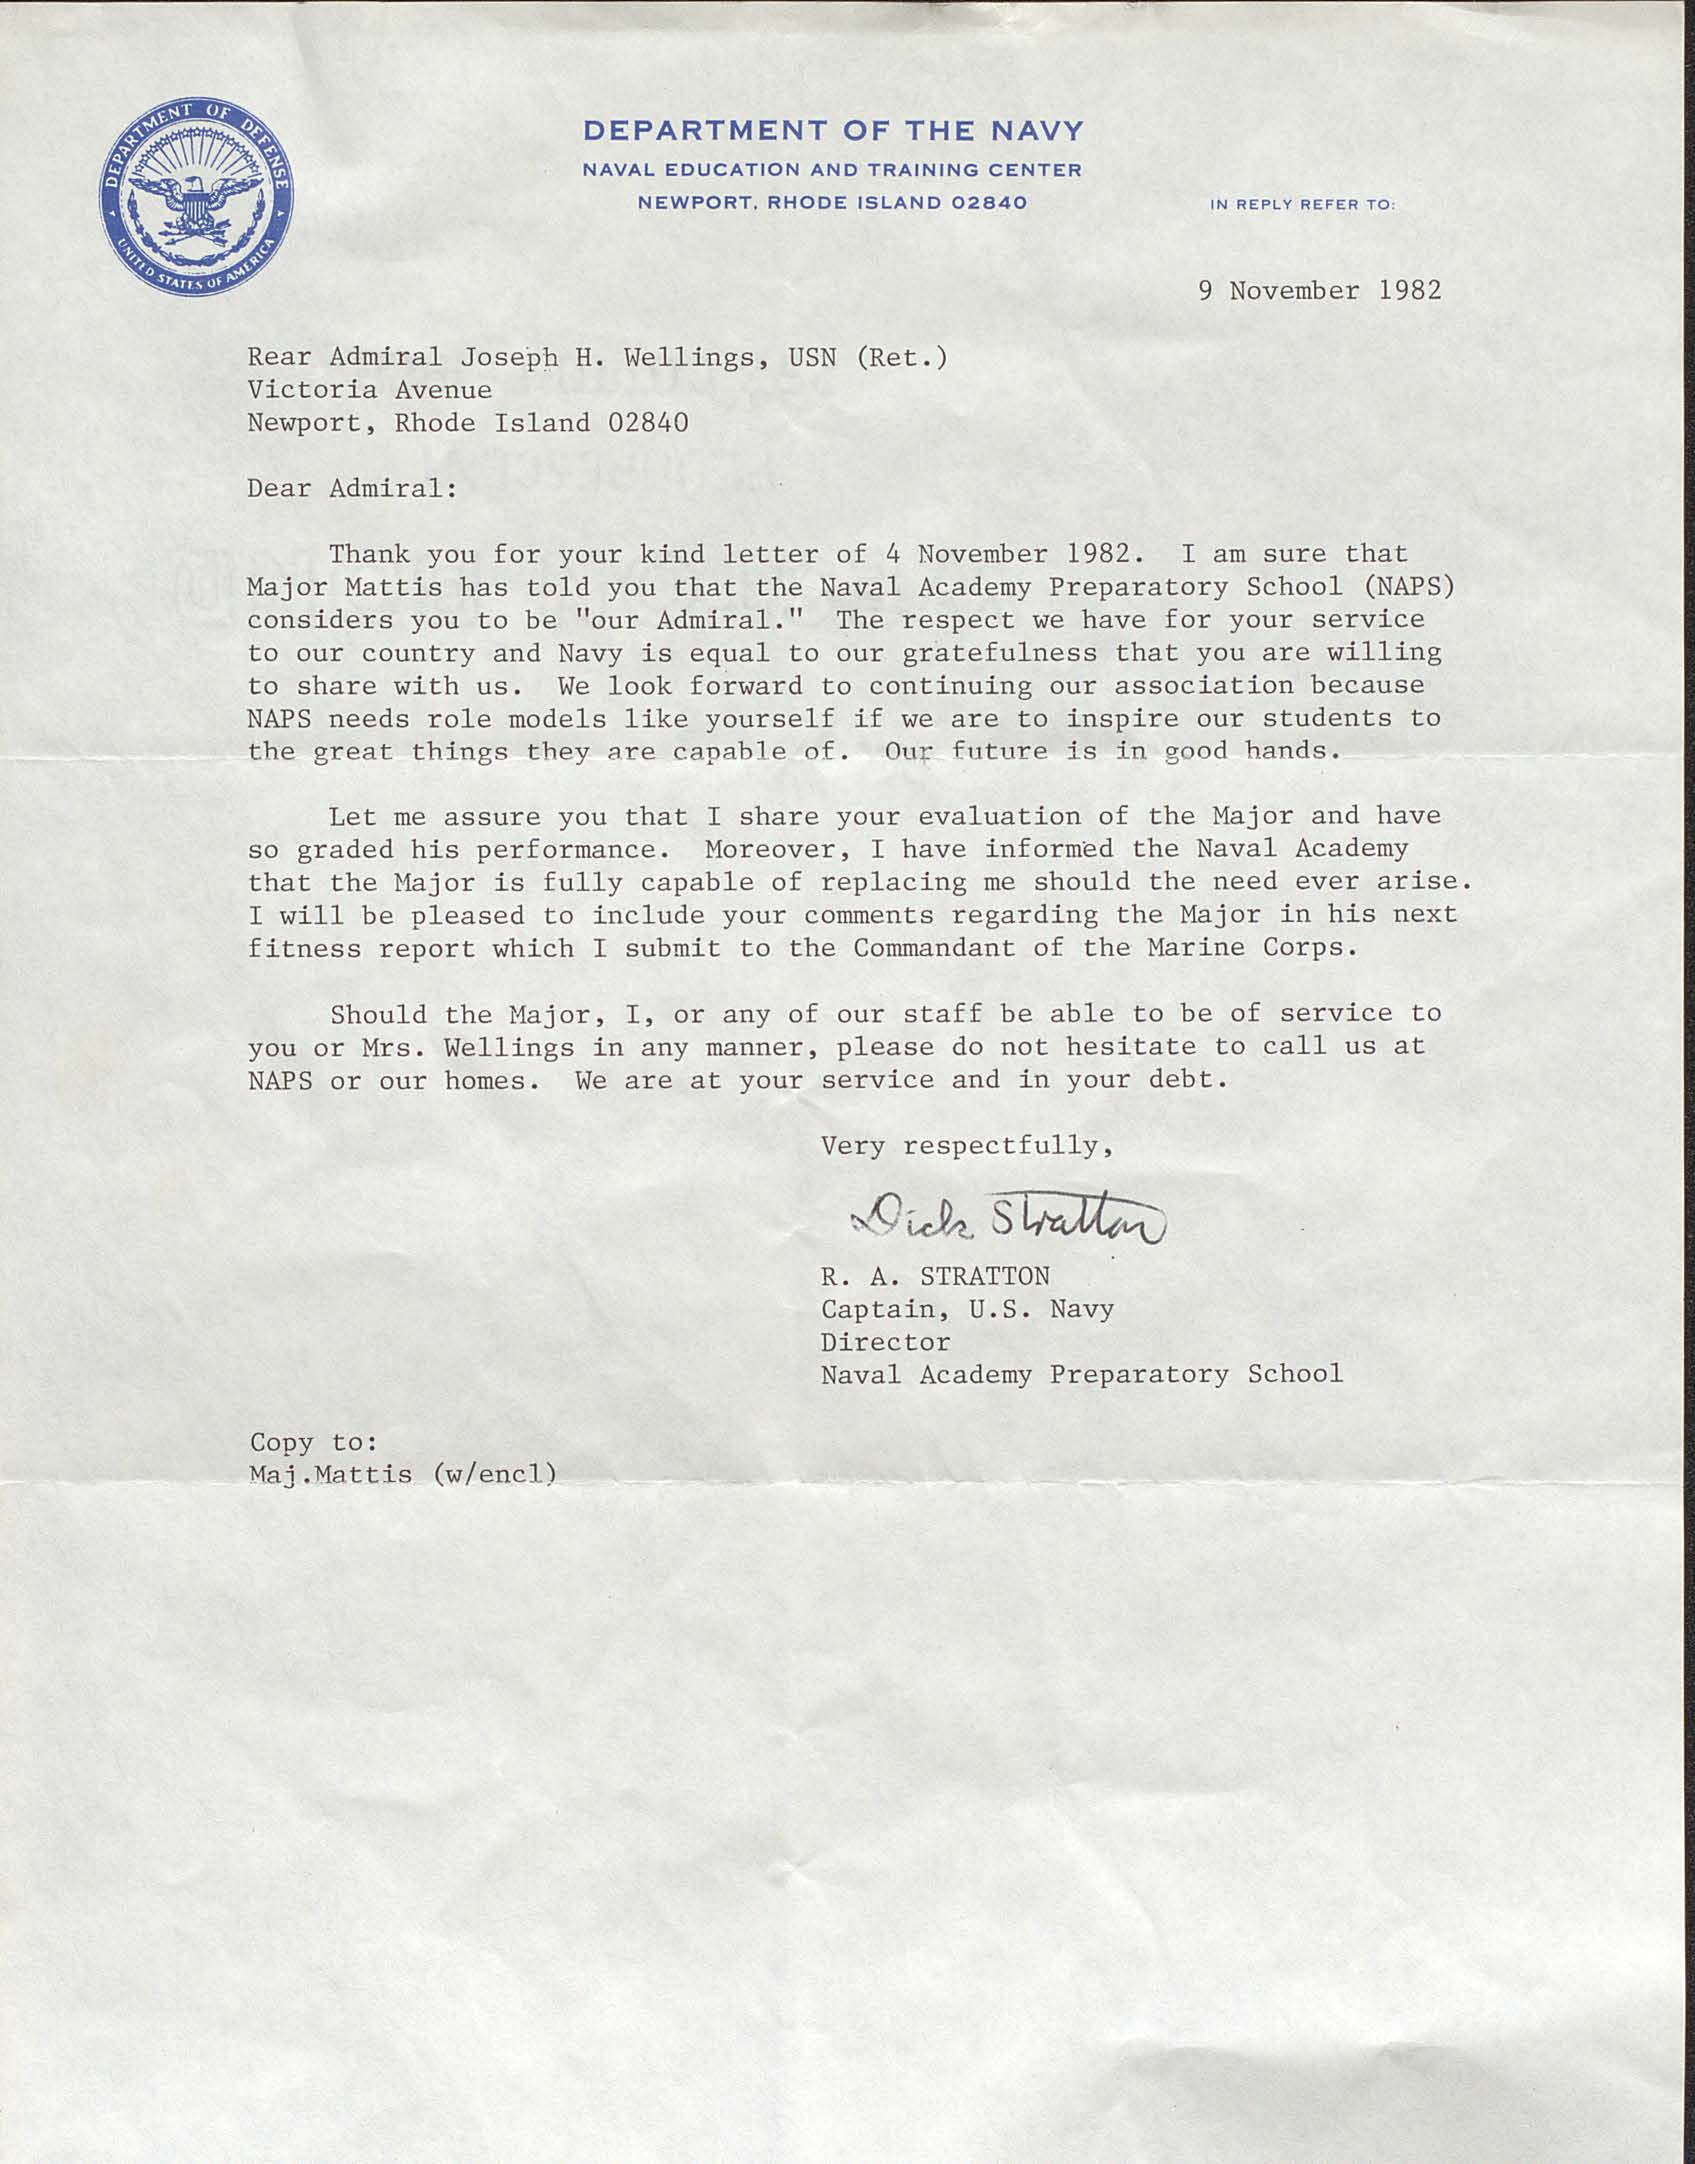 Letter from Captain Richard A. Stratton to RADM Joseph H. Wellings